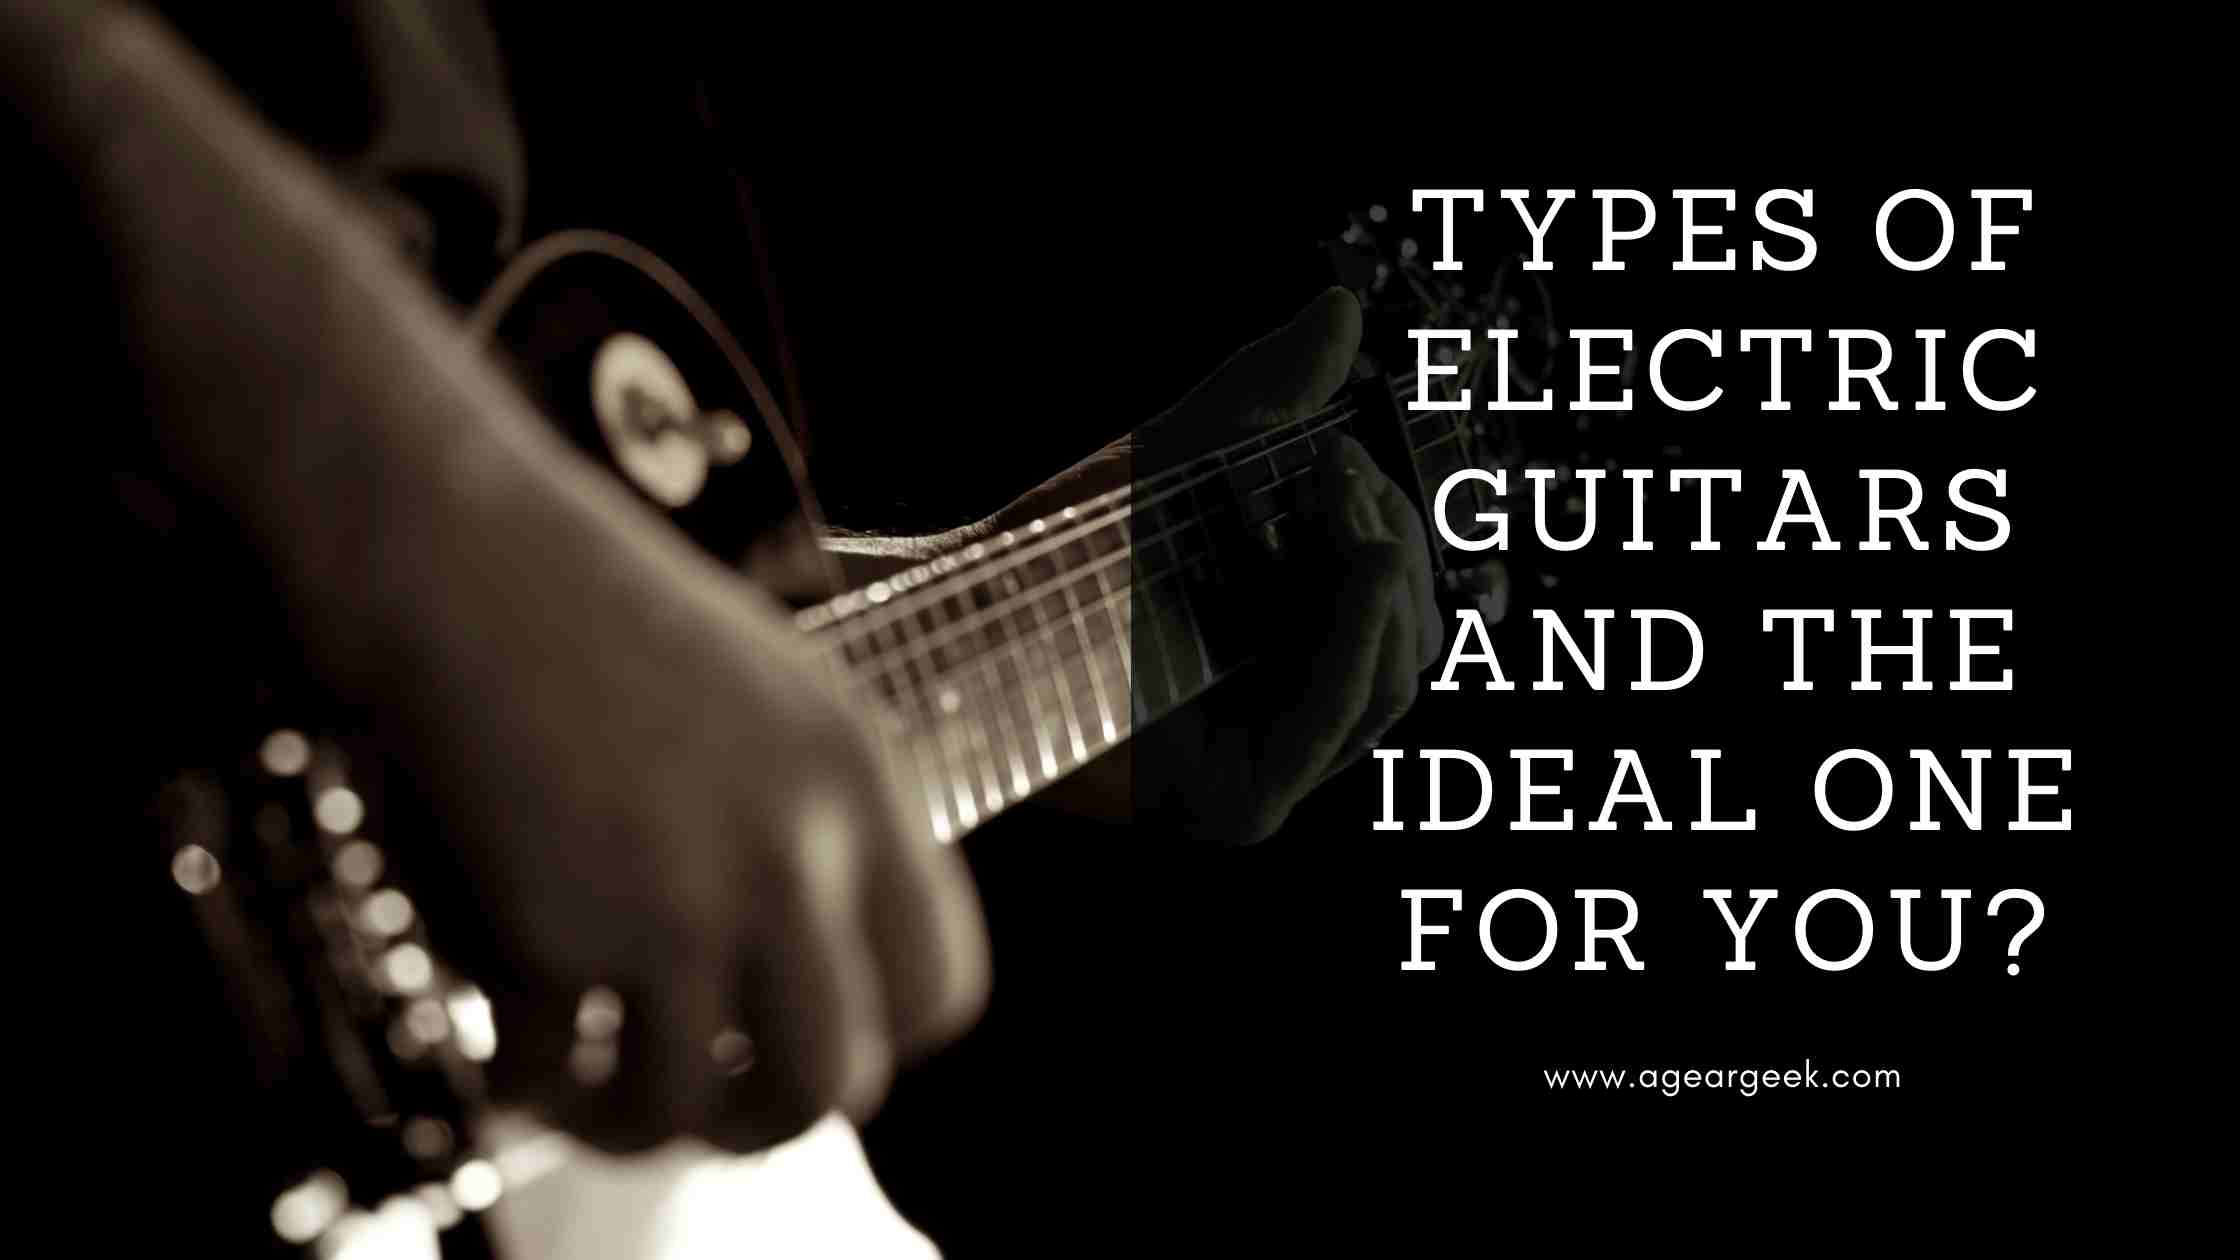 Types of electric guitars